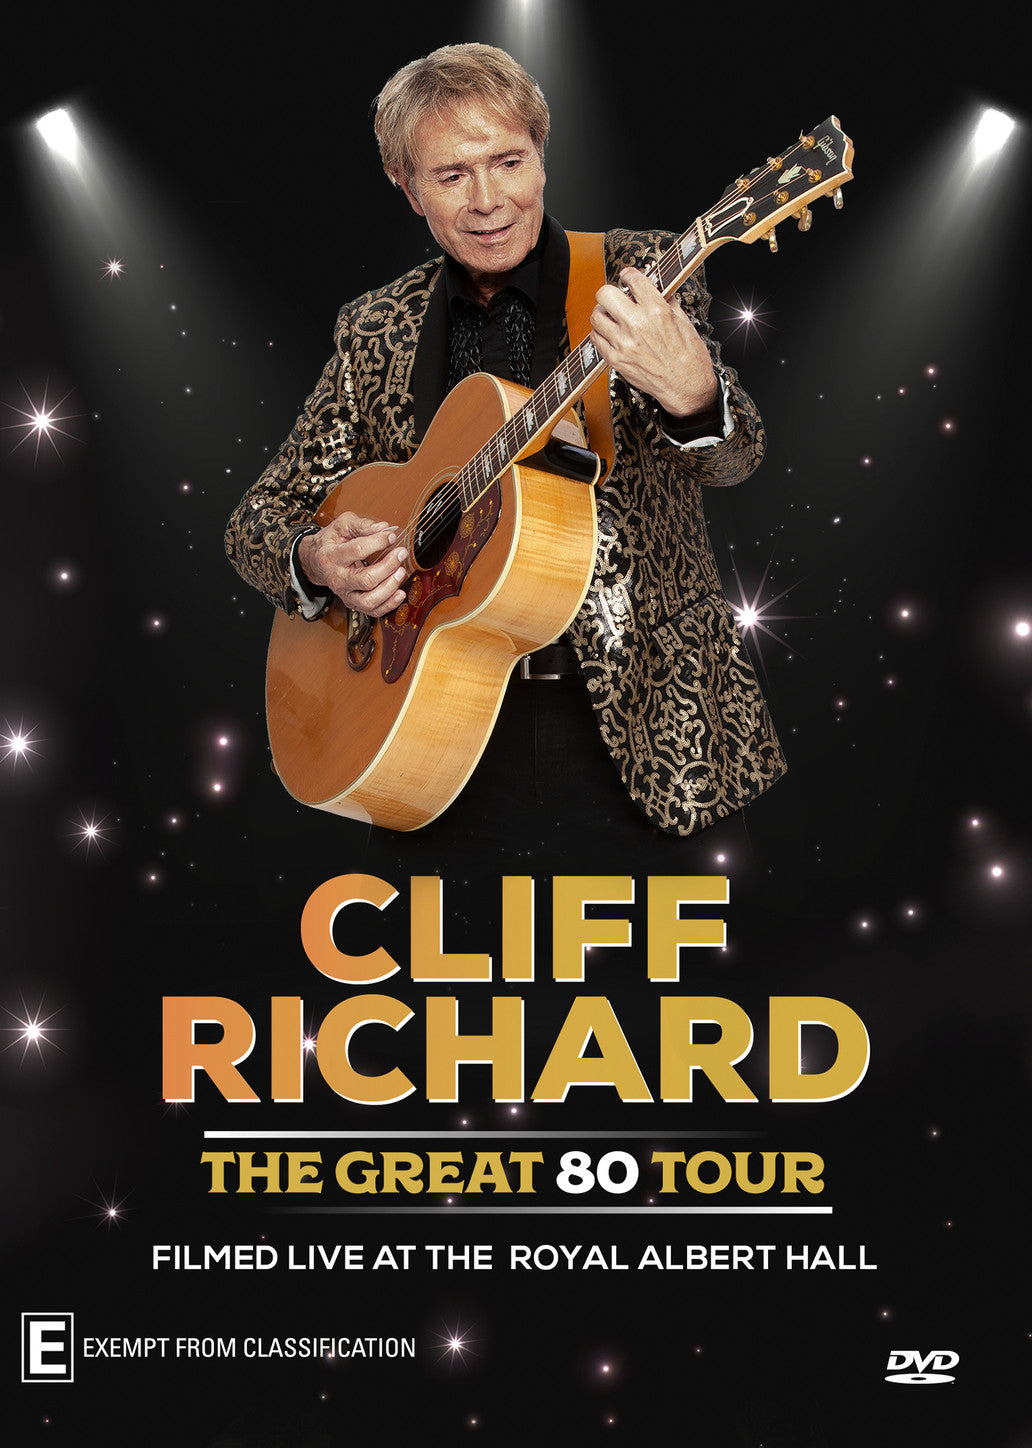 CLIFF RICHARD: THE GREAT 80 TOUR